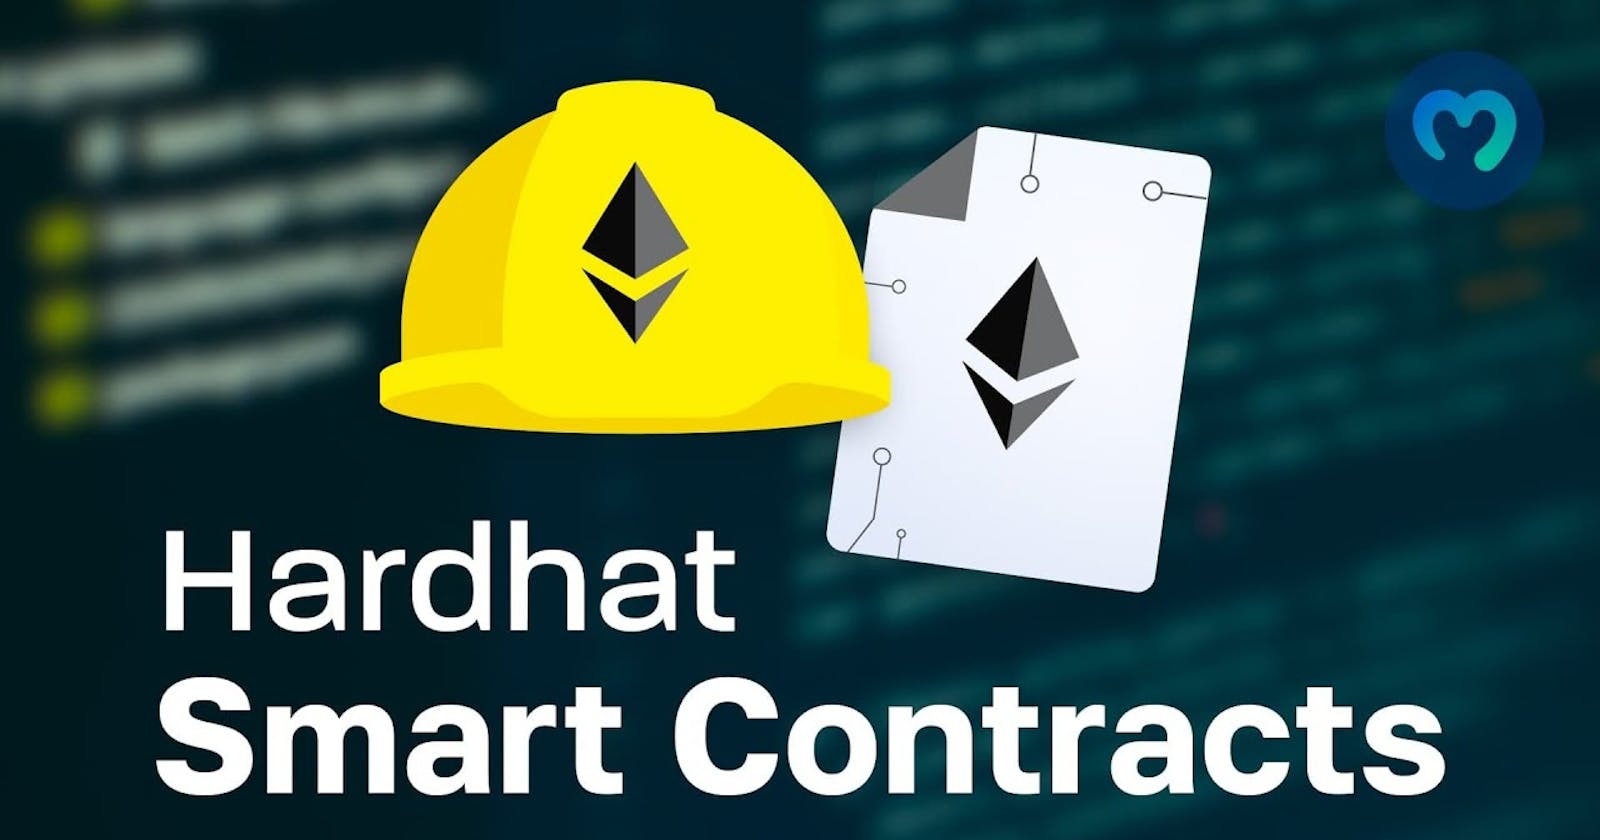 Writing your first smart contract with Hardhat